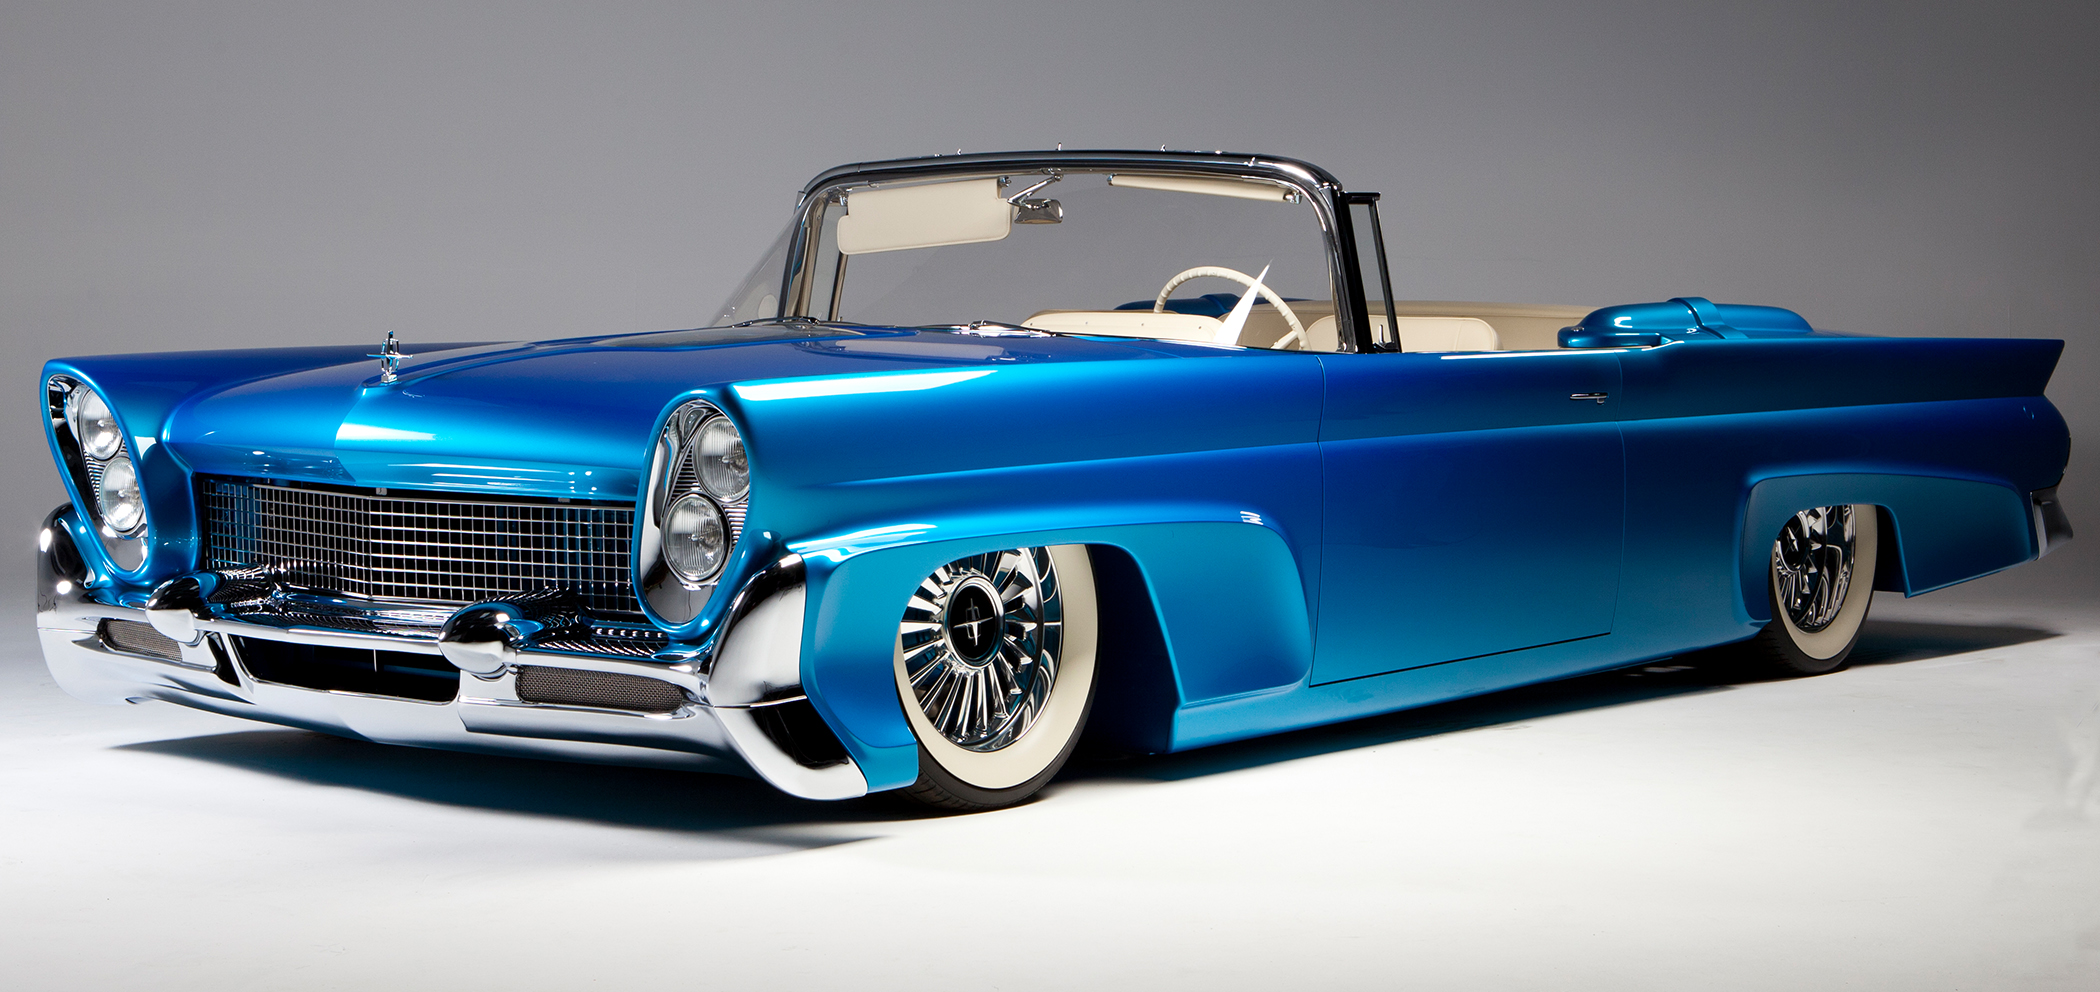 ’58 Lincoln Continental “Maybellene”